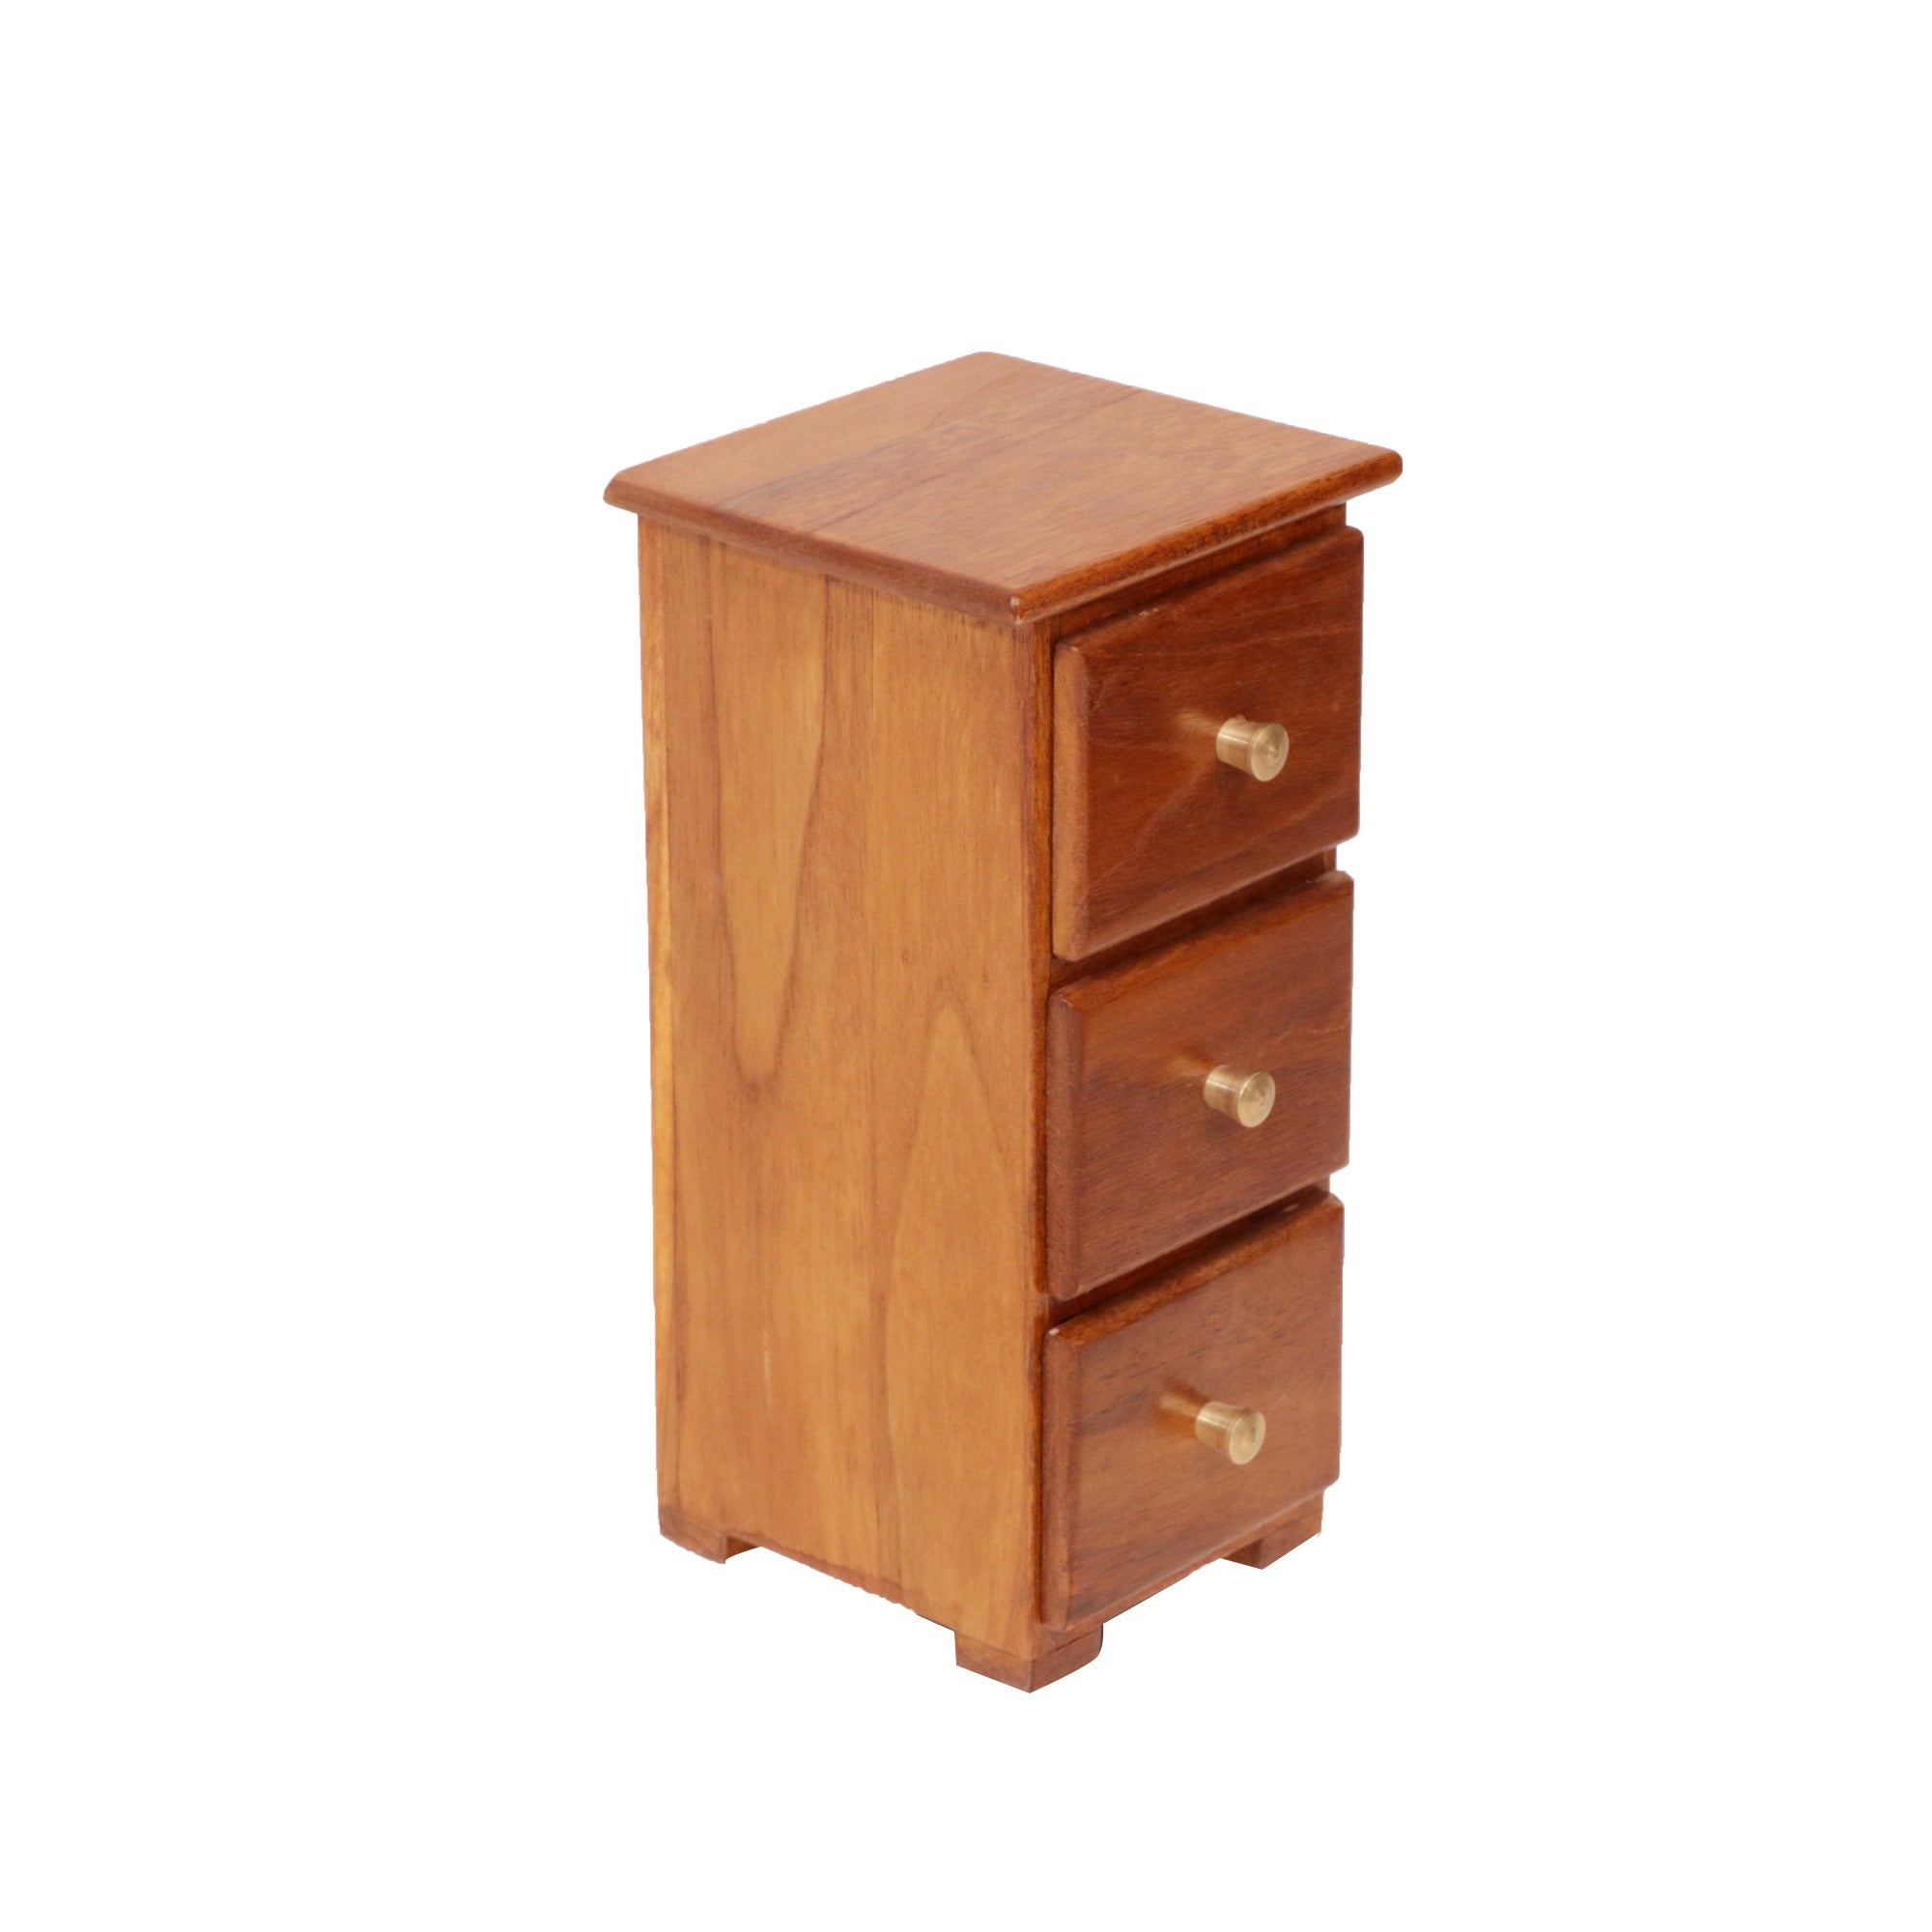 Wooden Miniature Outer Space 3 Drawer Chest Tower (The product is used as Desk organiser) (Natural Touch) Desk Organizer